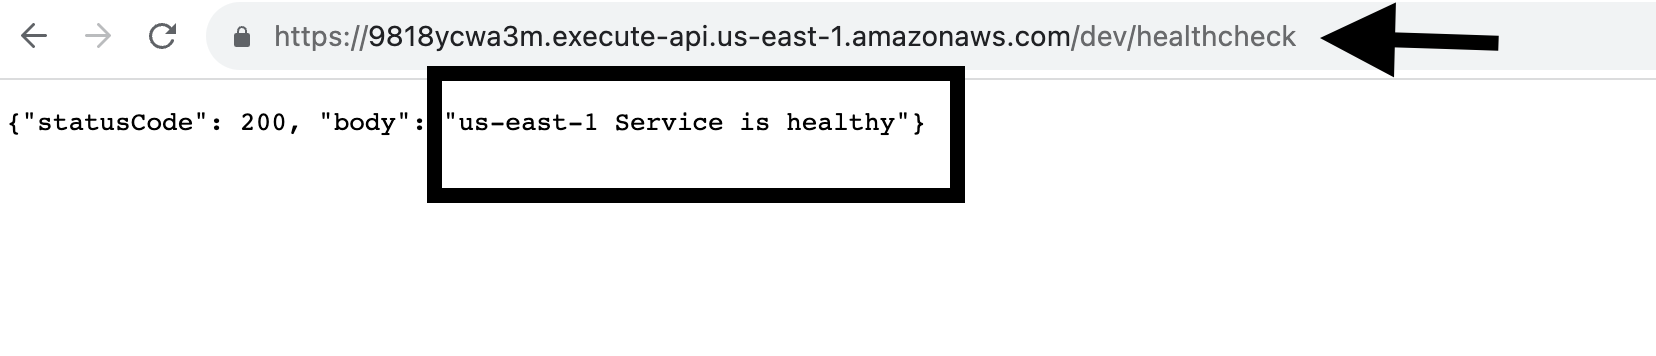 AWS API Gateway Status: The test result indicates a healthy status for the us-east-1 region.